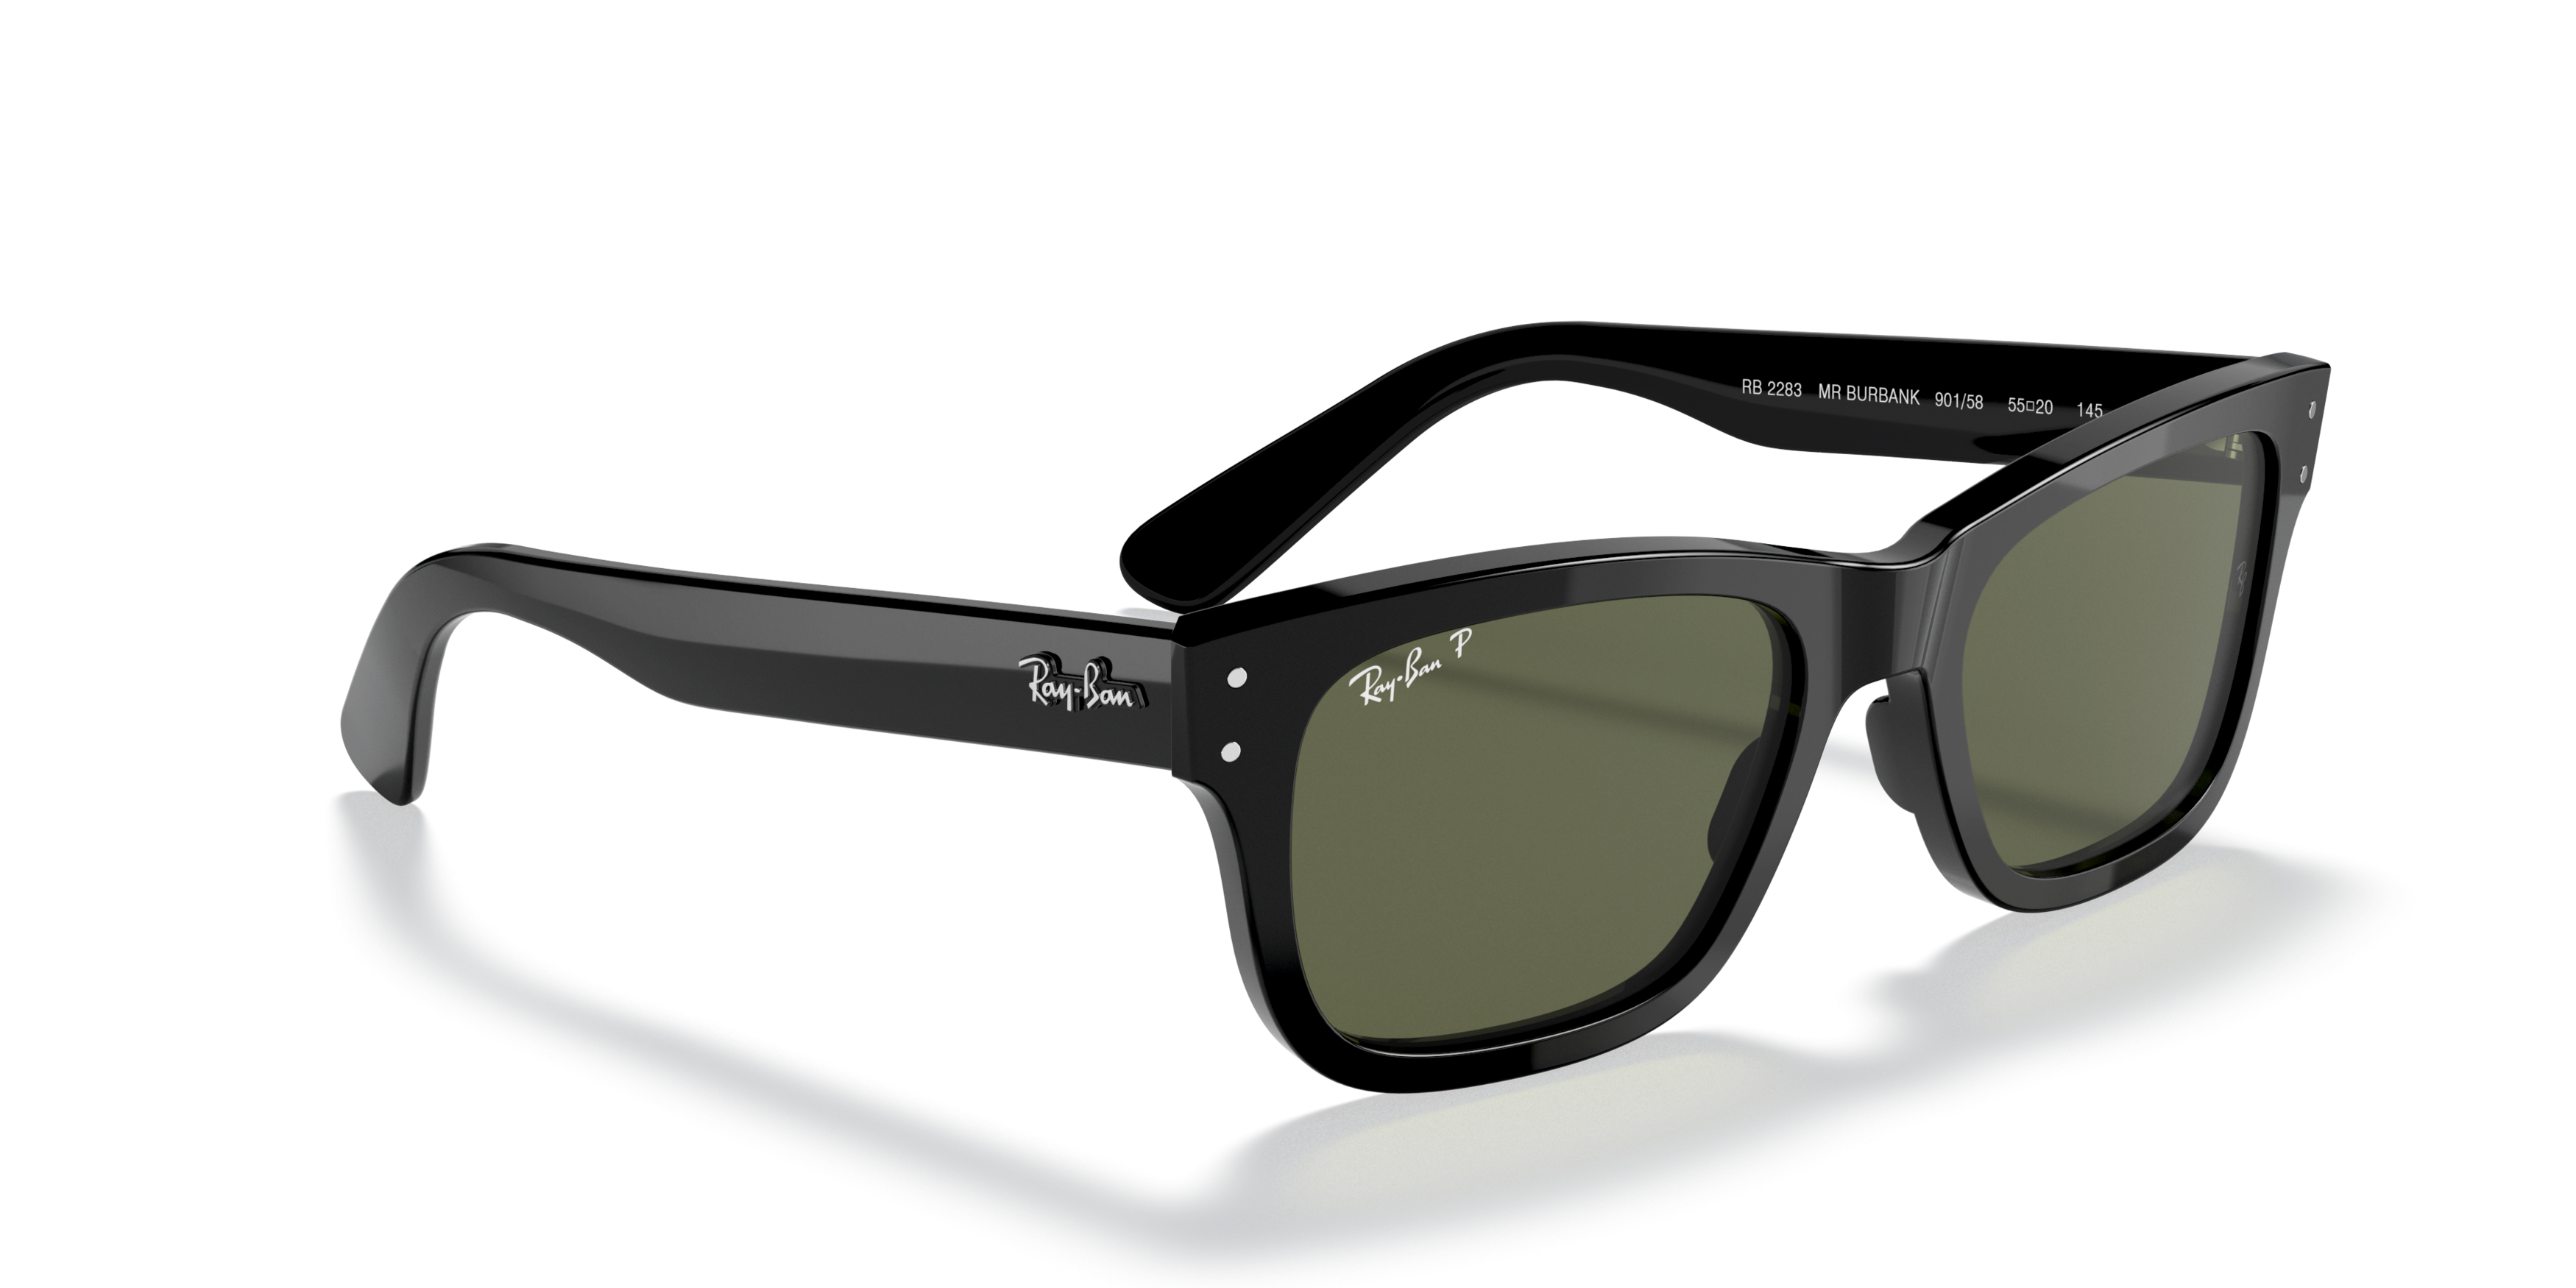 [products.image.angle_right01] Ray-Ban Burbank RB2283 901/58